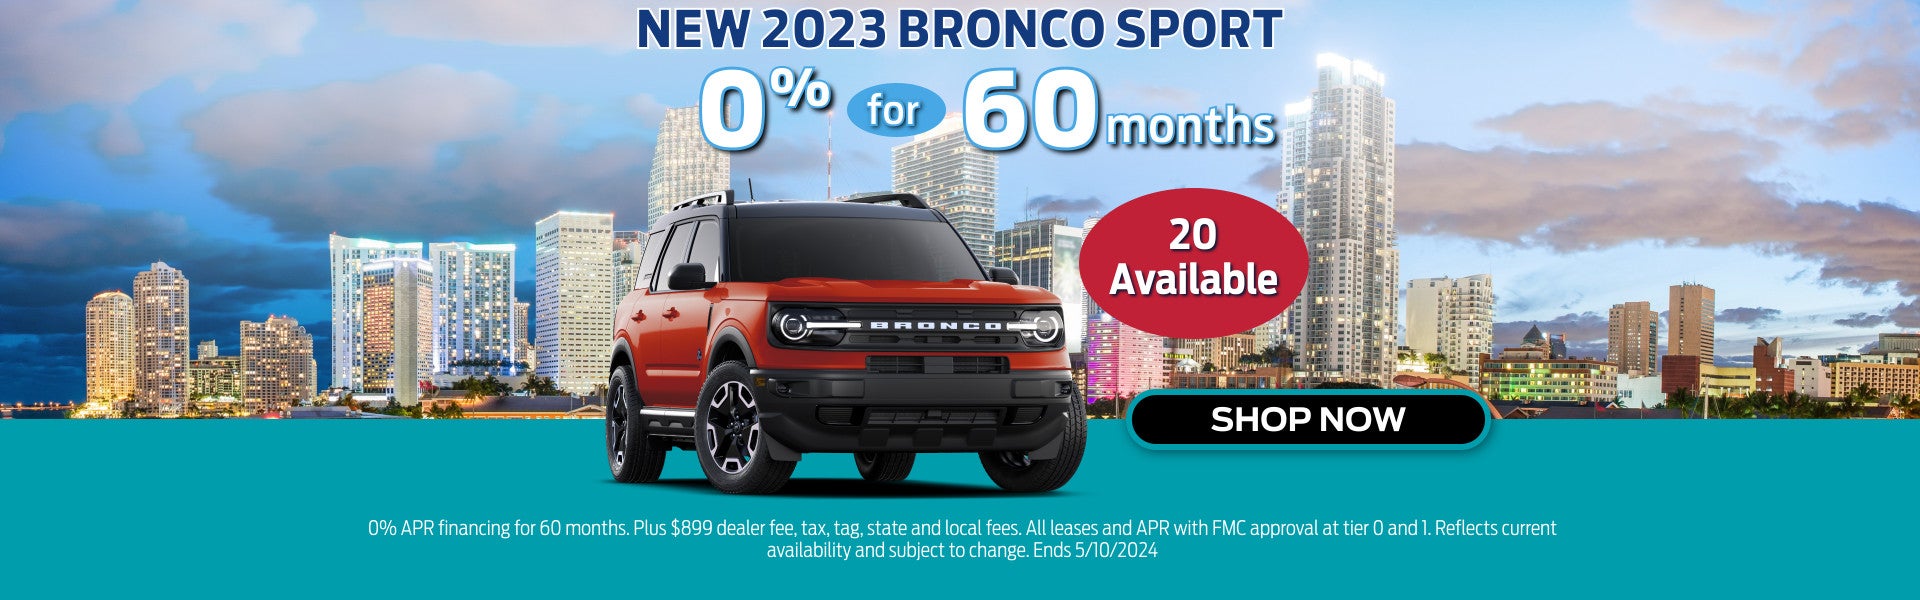 2023 Bronco Sport, 0% for 60 months